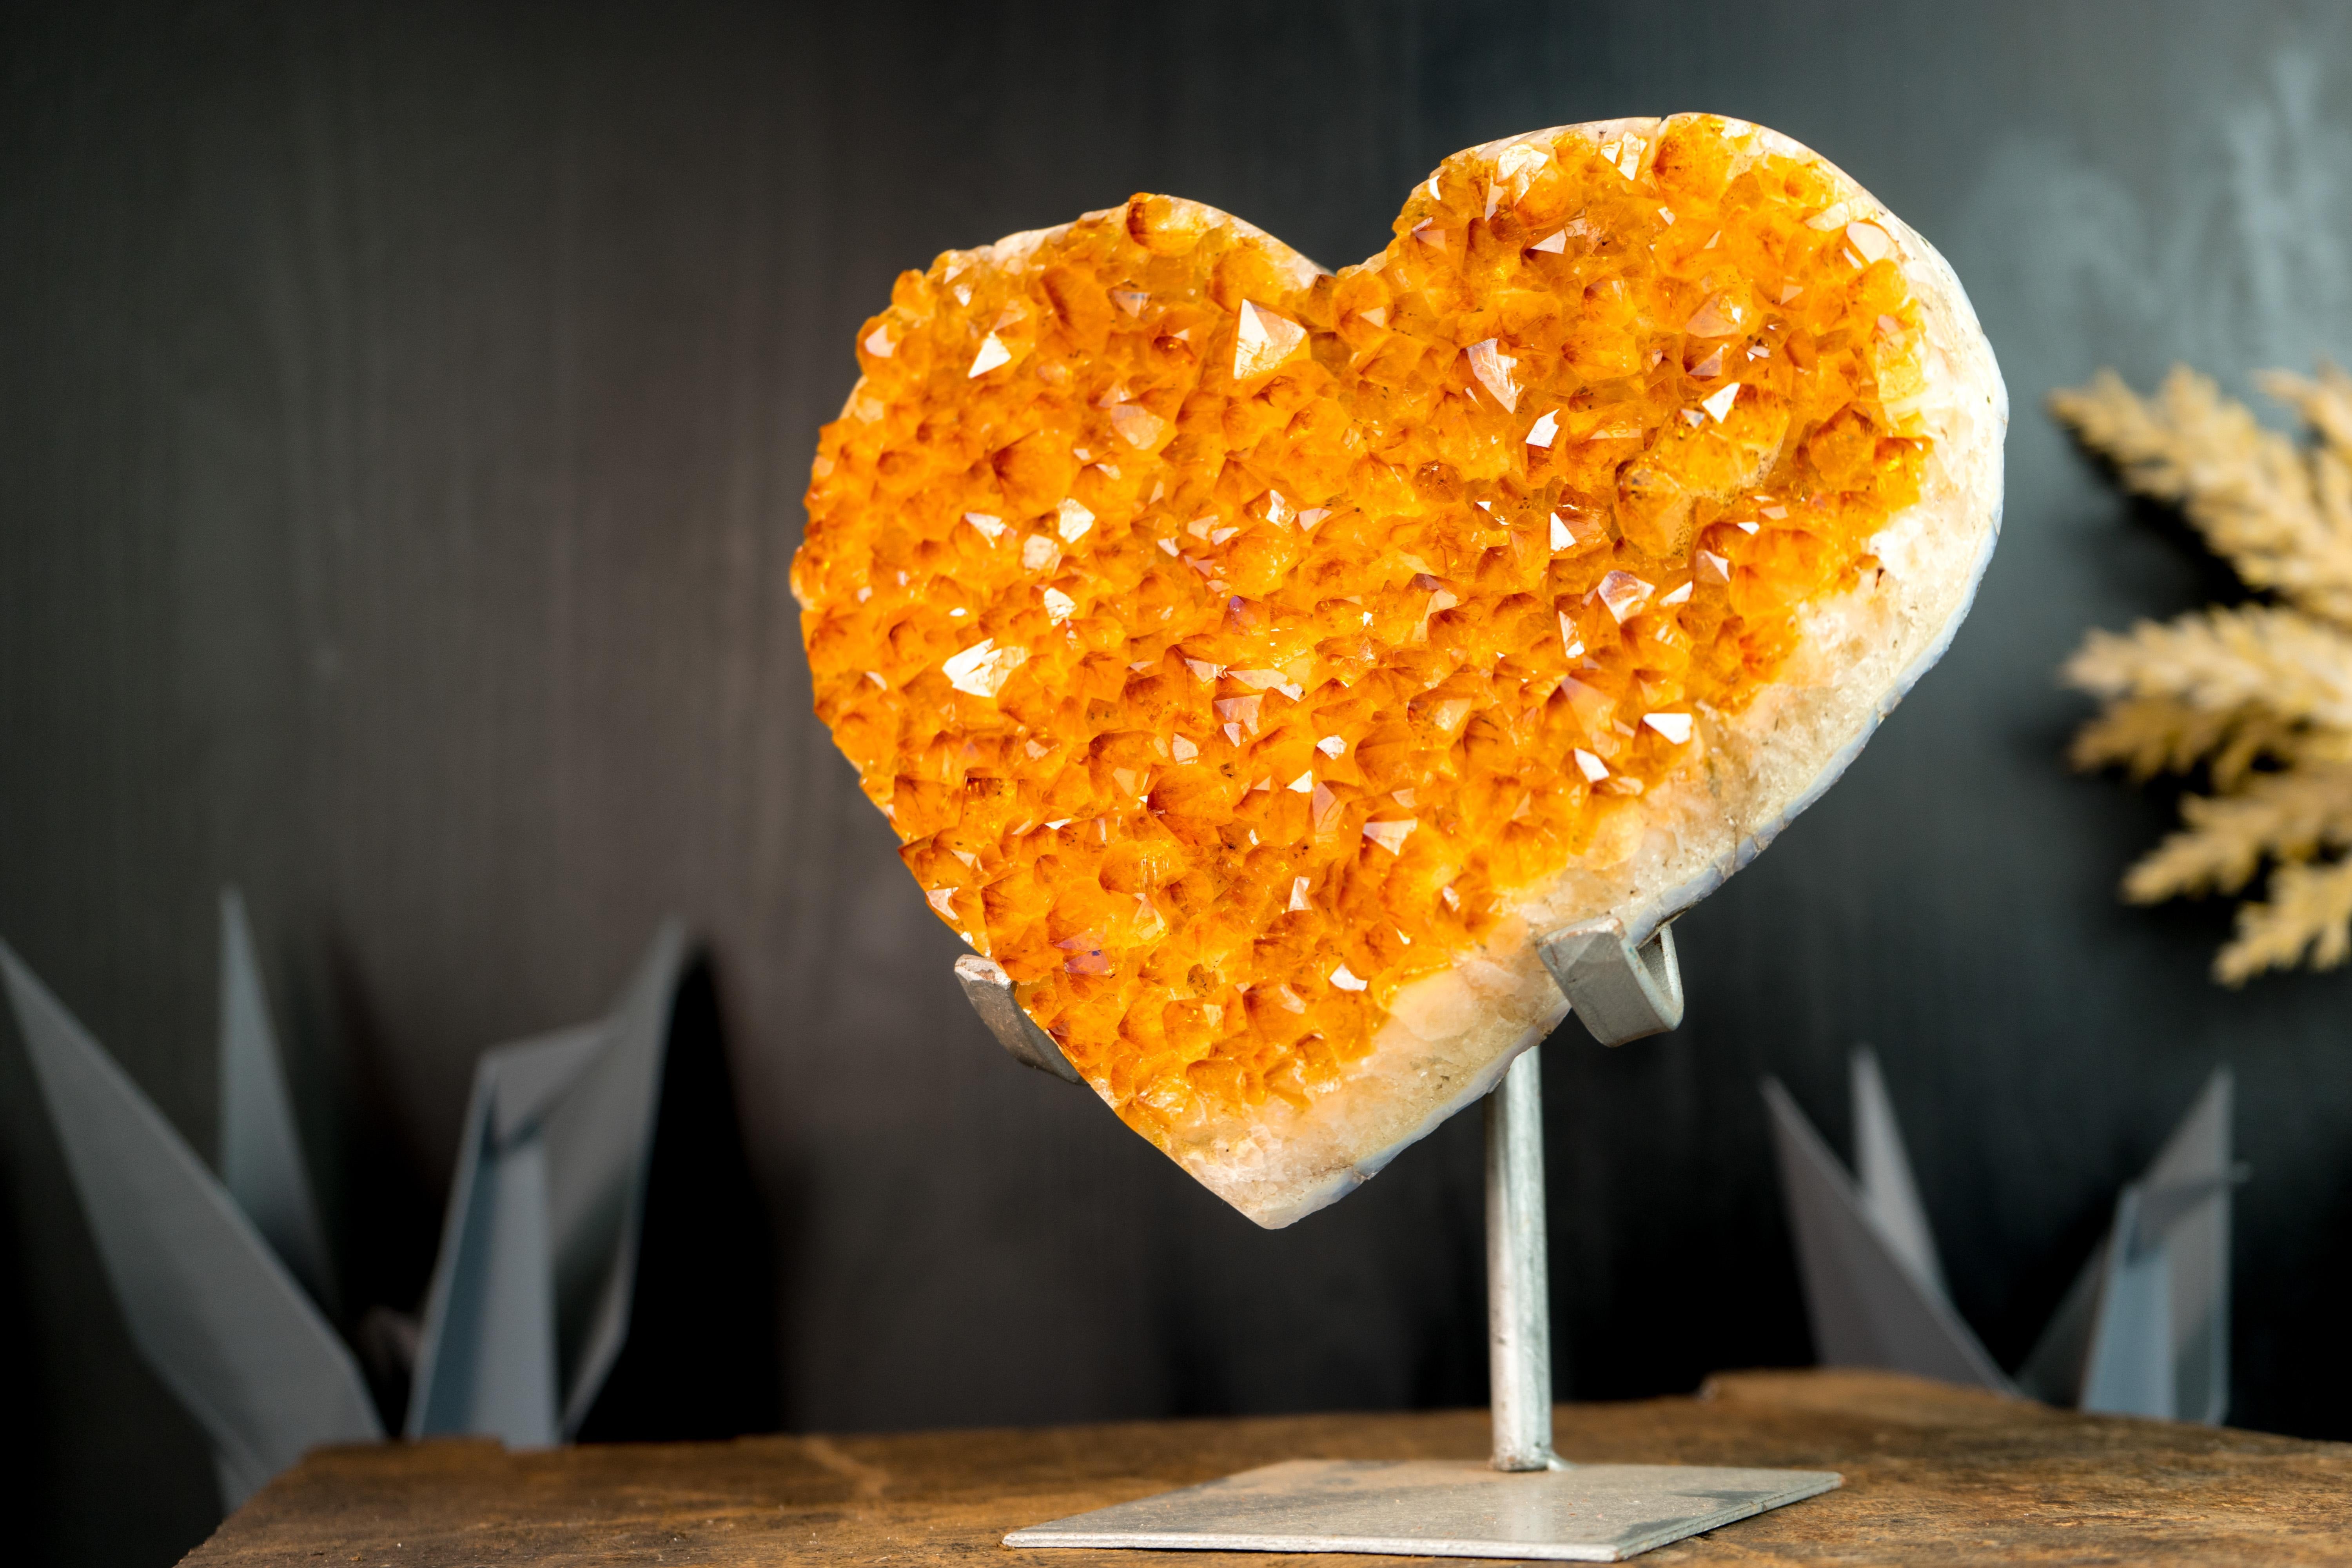 Agate Large Golden Orange Citrine Heart with Sparkly Extra-Grade Citrine Druzy For Sale